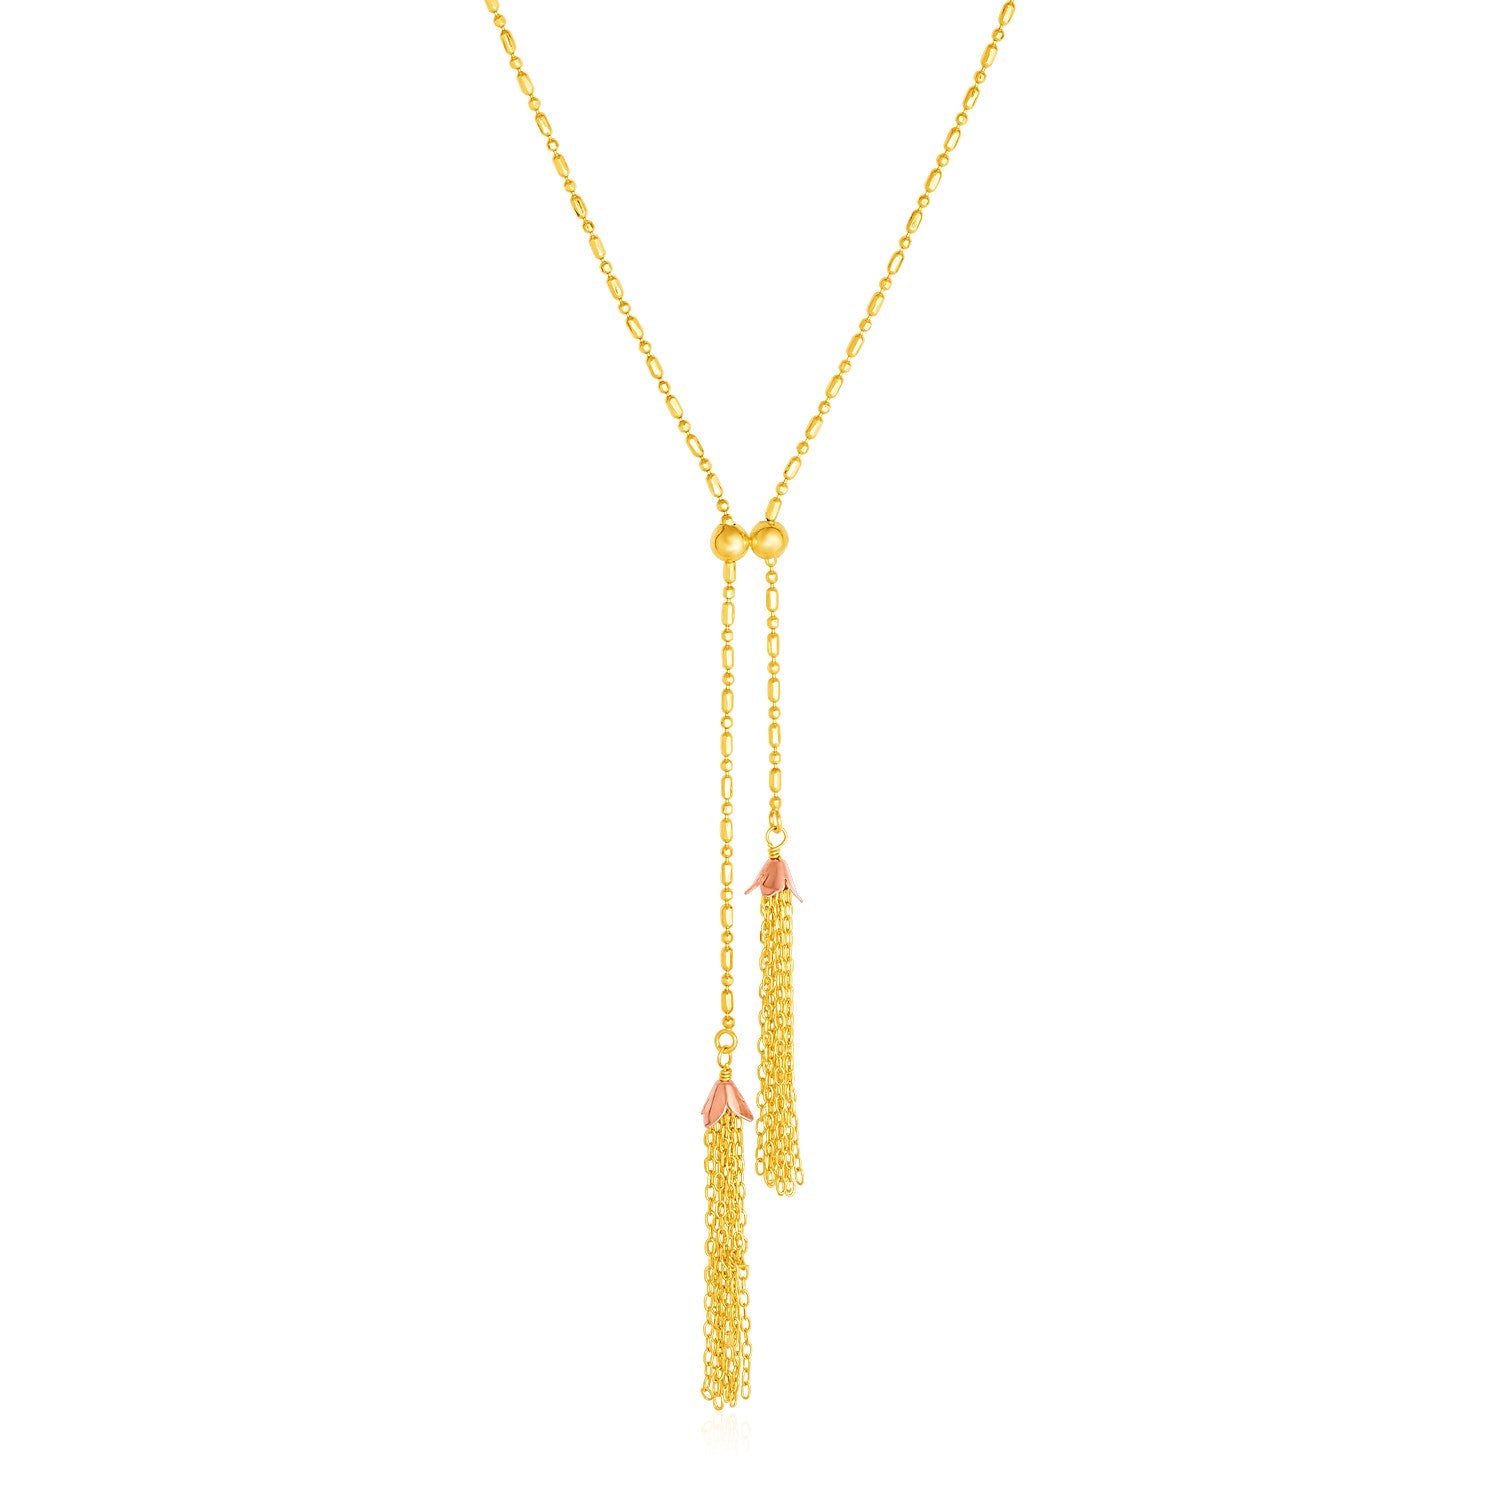 14k Two Tone Gold Lariat Necklace with Tassels